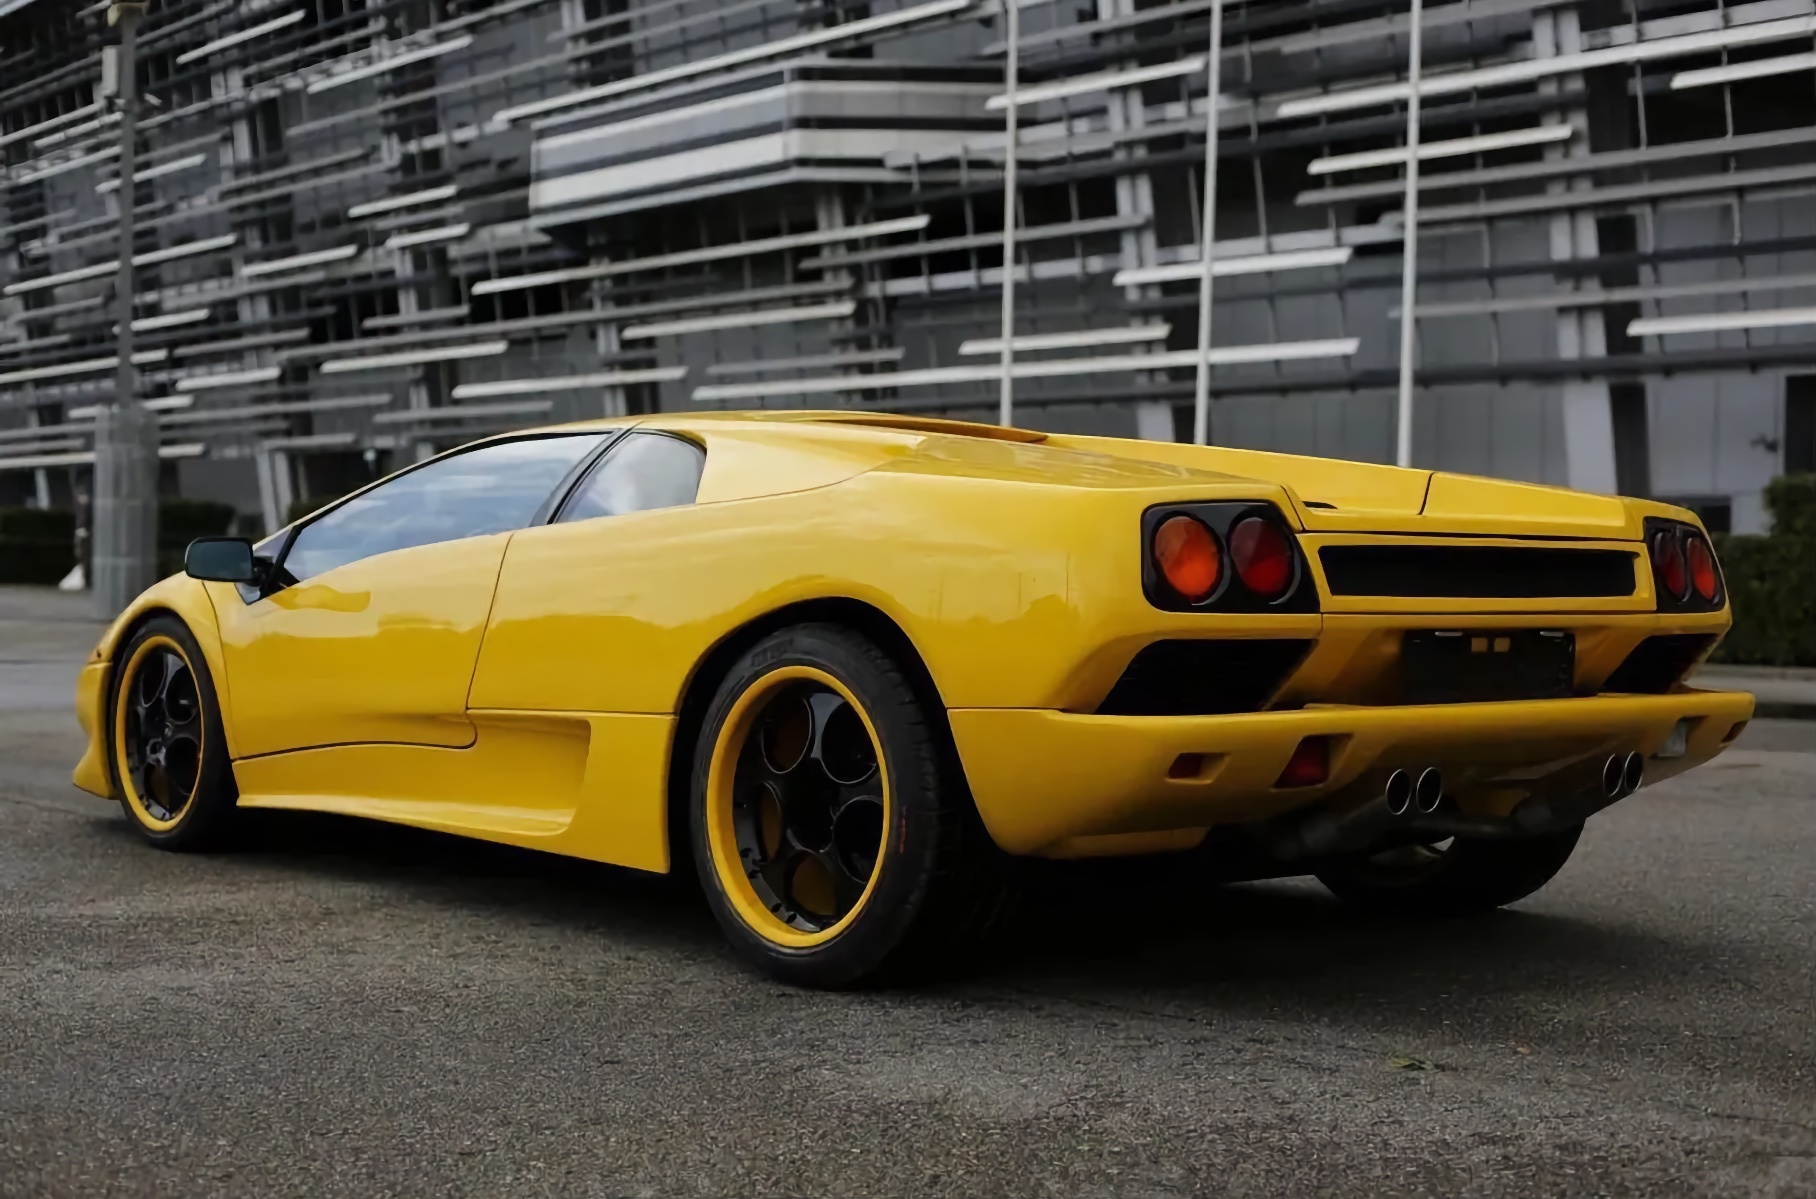 A 32-year-old Lamborghini Diablo is being sold in Russia for 34 million rubles